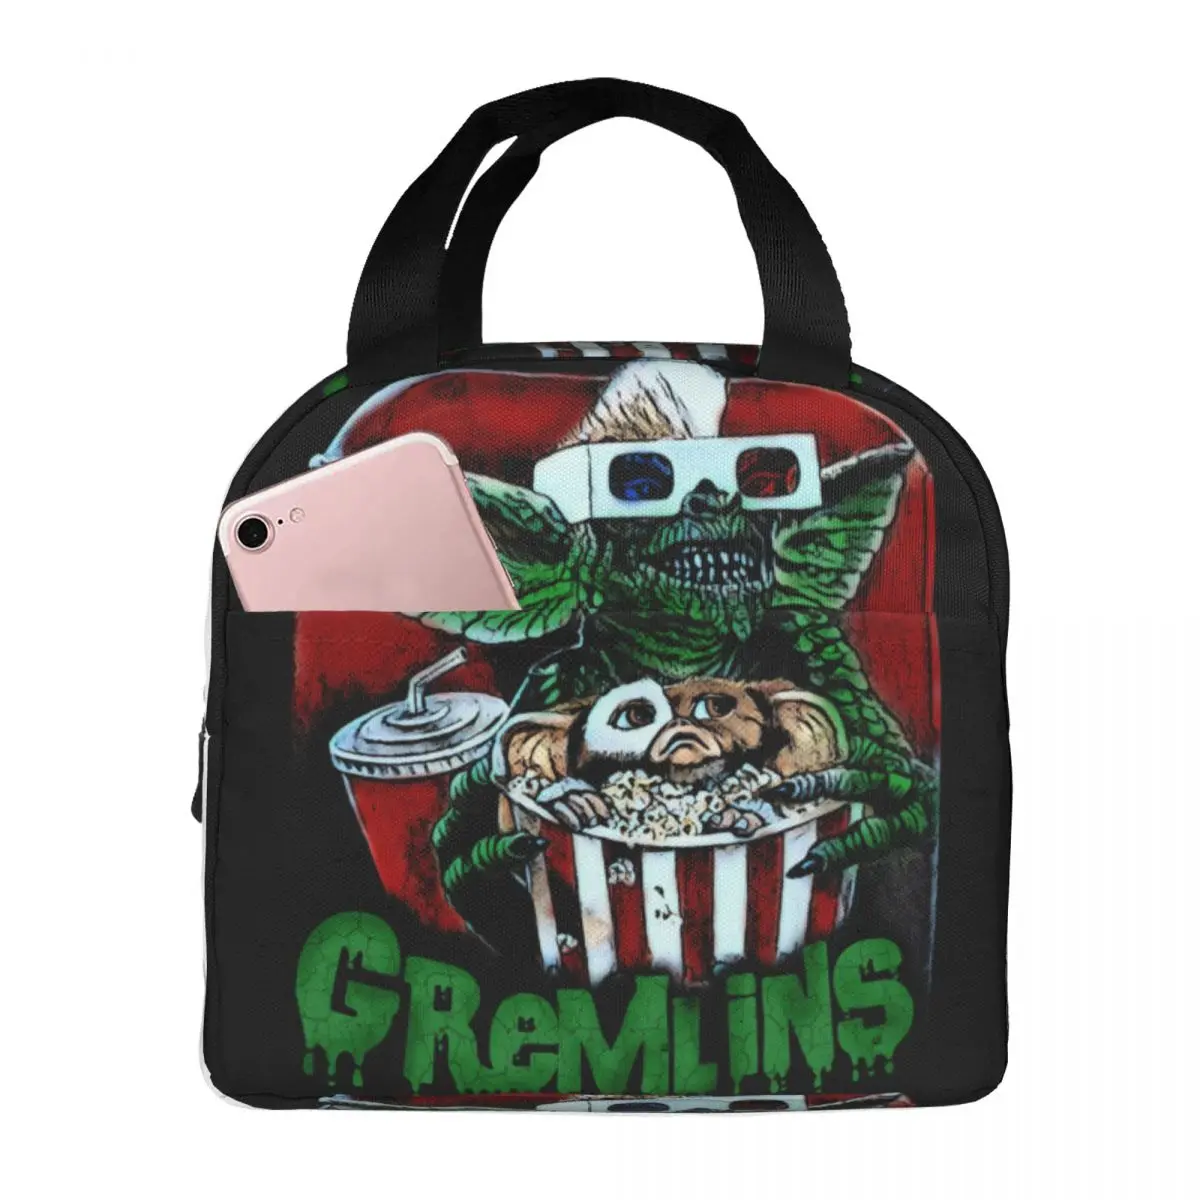 Lunch Bags for Women Kids Gremlins Insulated Cooler Portable Picnic Travel Gizmo Mogwai Monster Oxford Tote Bento Pouch